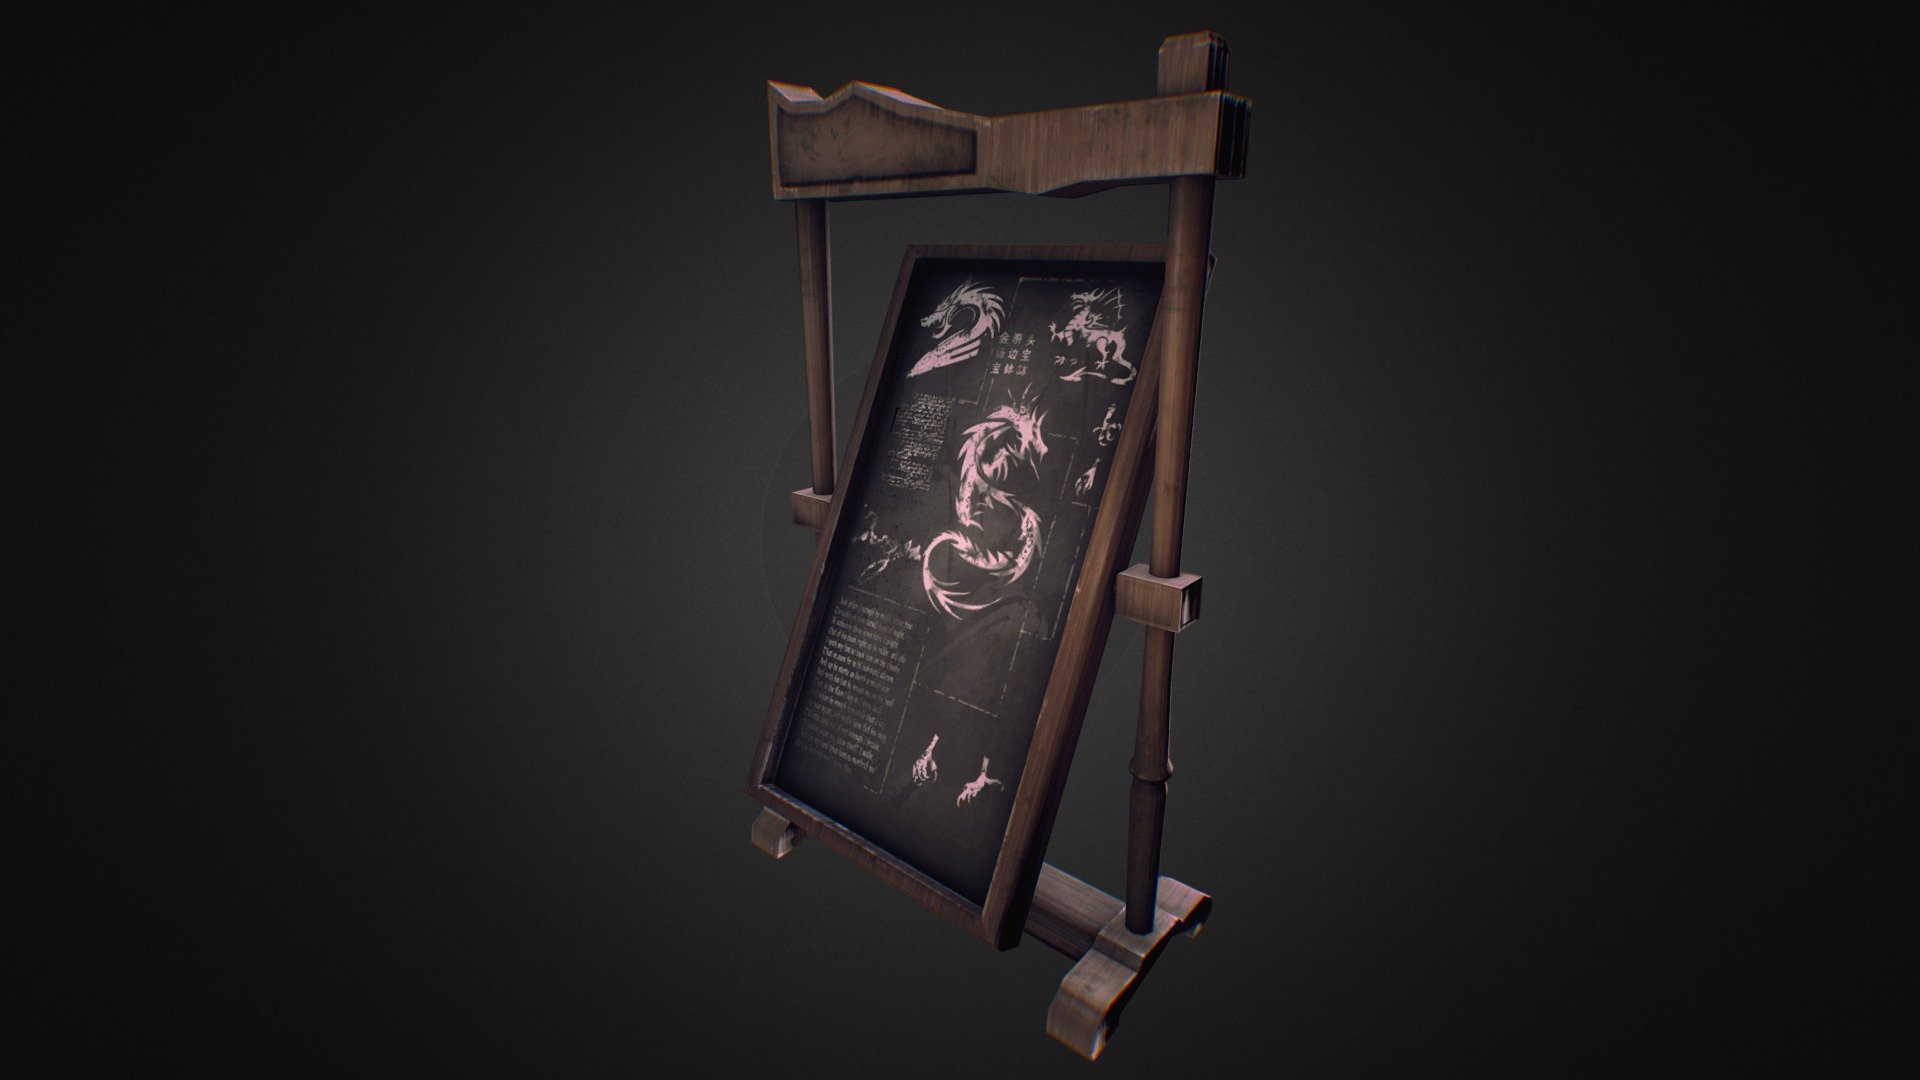 Personal Object, Really Like How The Writing Came Out - Chalkboard - 3D model by thelowestanimal 3d model